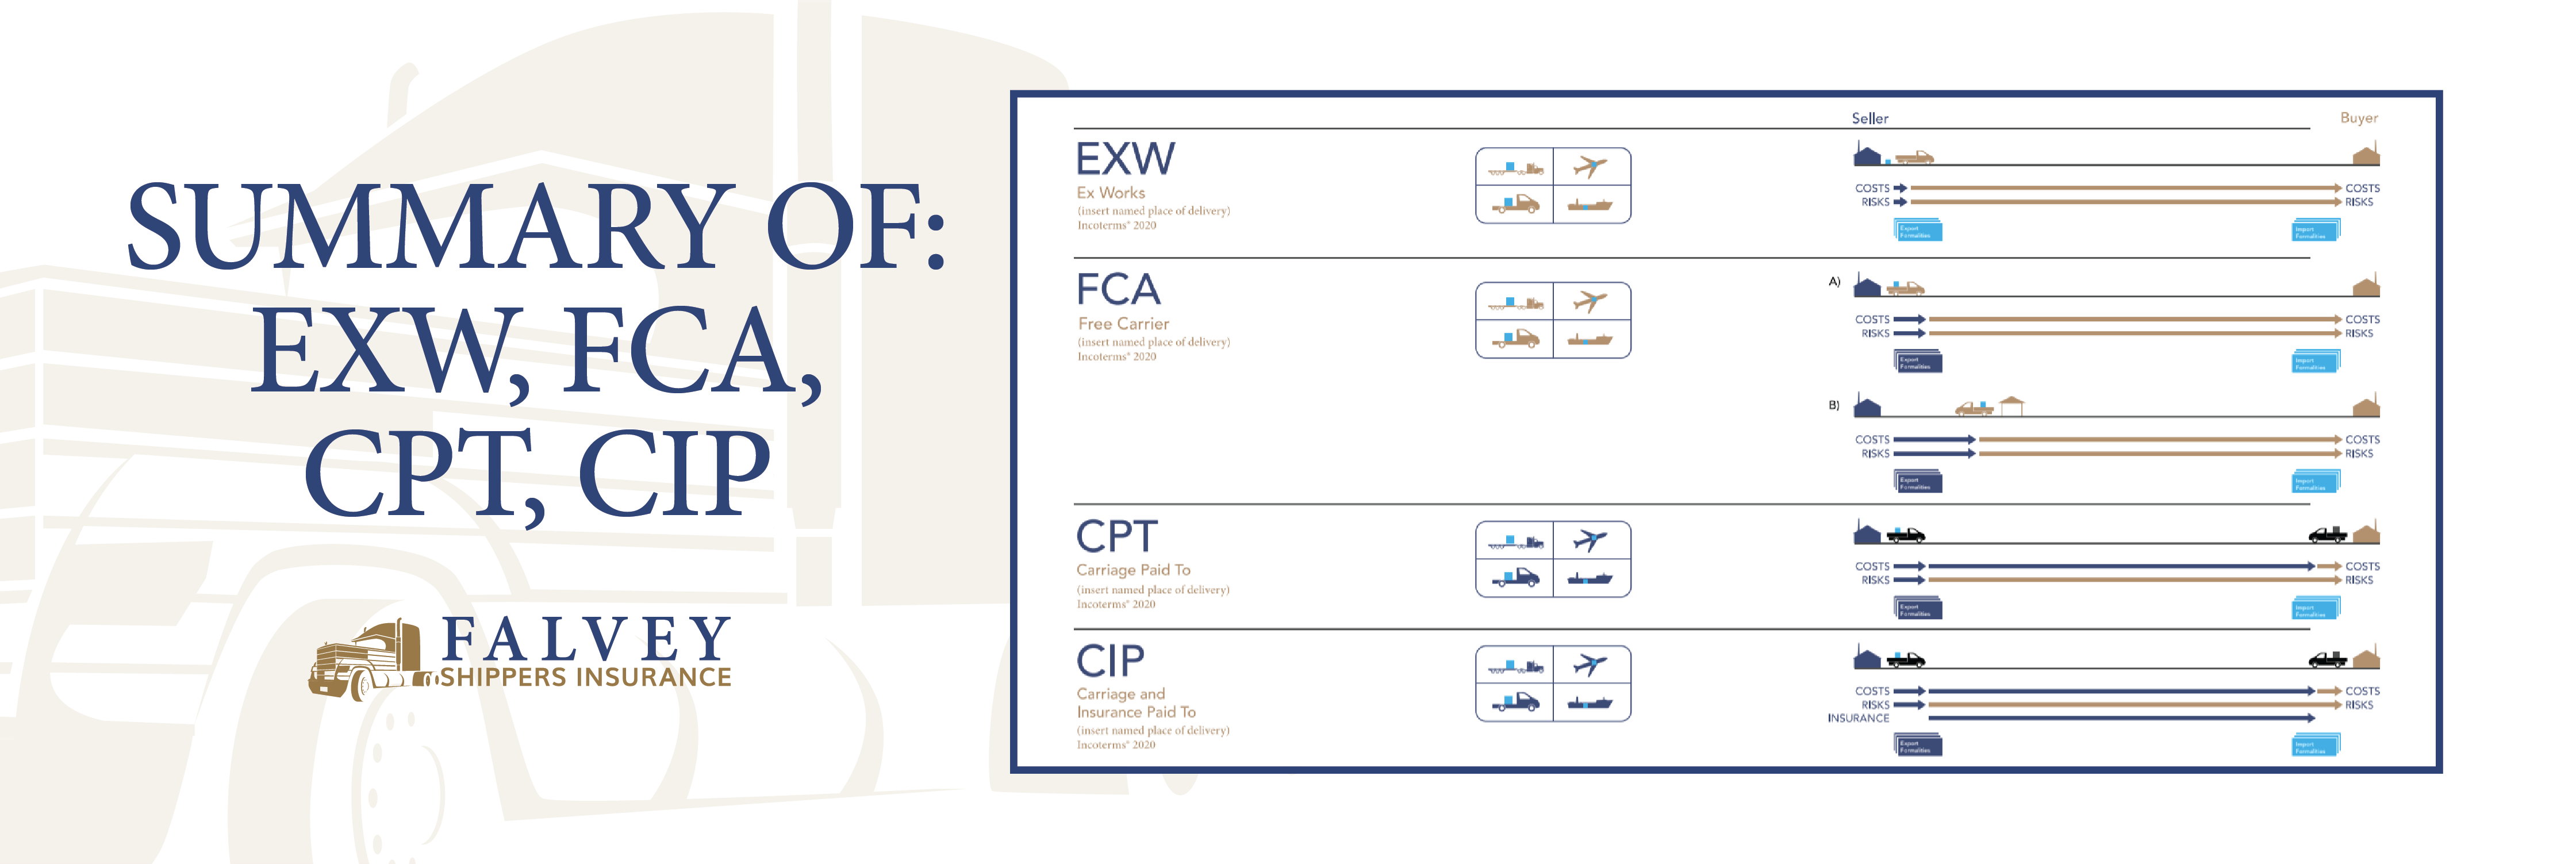 Banner for Summary of- EXW, FCA, CPT, CIP